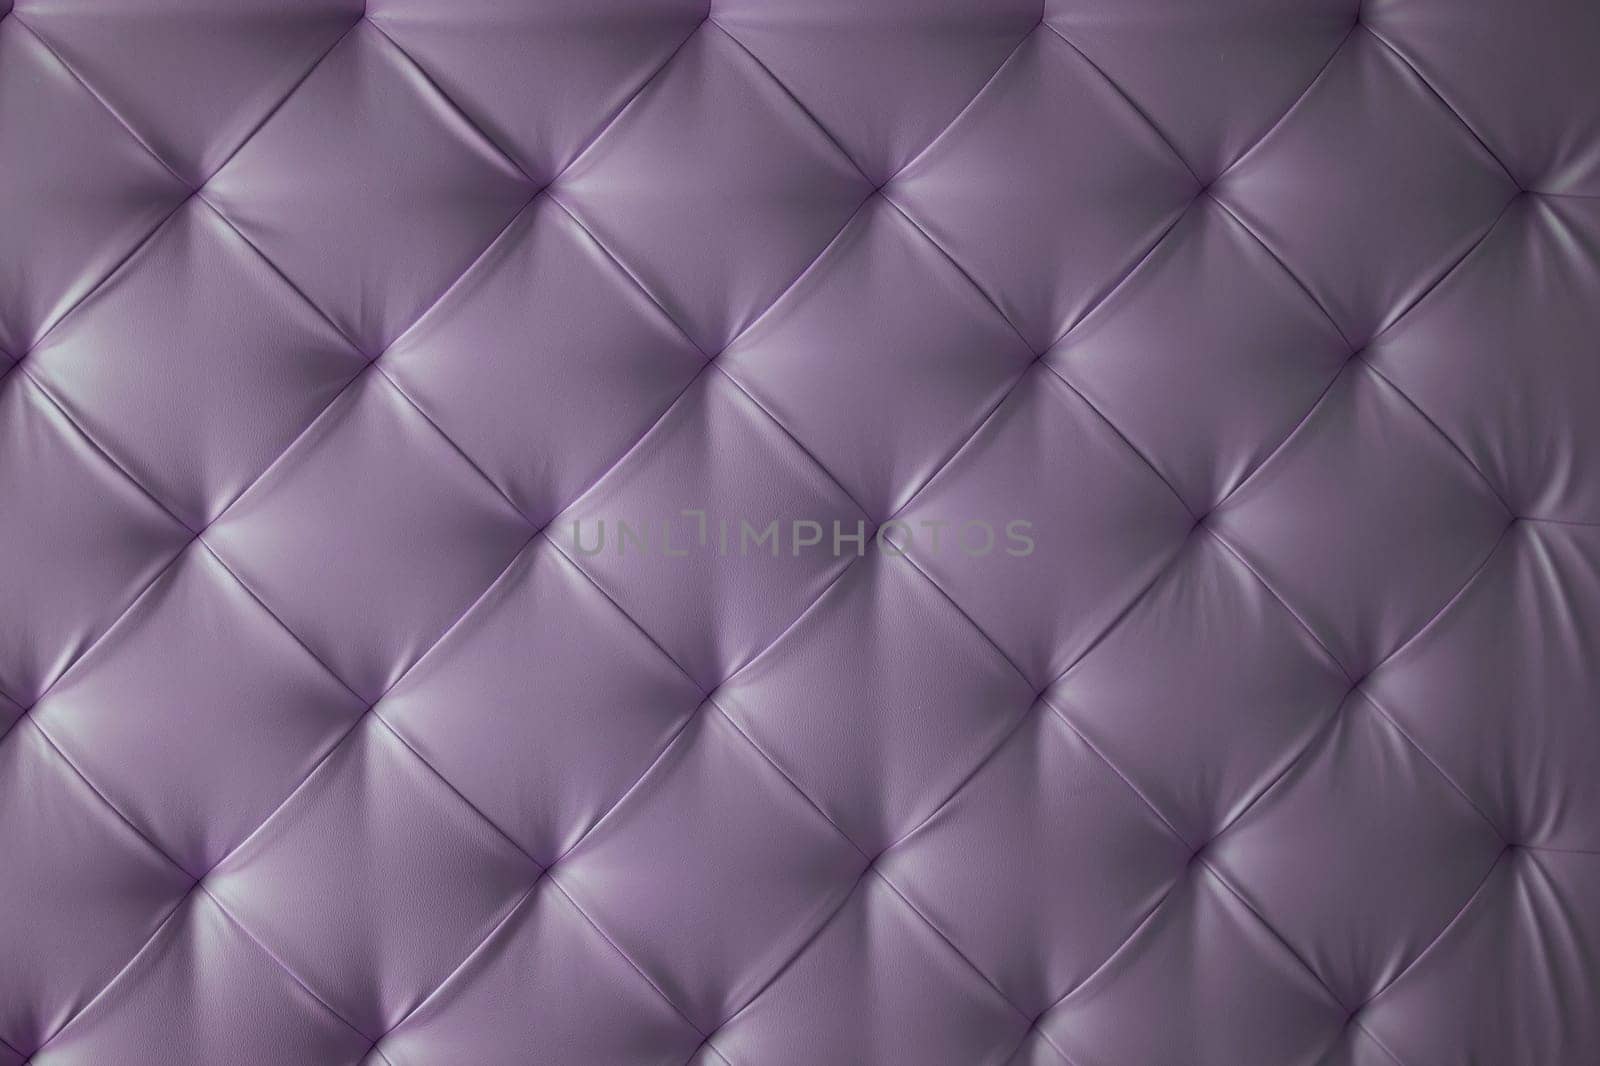 Furniture design, classic interior and modern material concept - minimalist leather quilted upholstery sofa, bed headboard, elegant home decor texture and background by aprilphoto